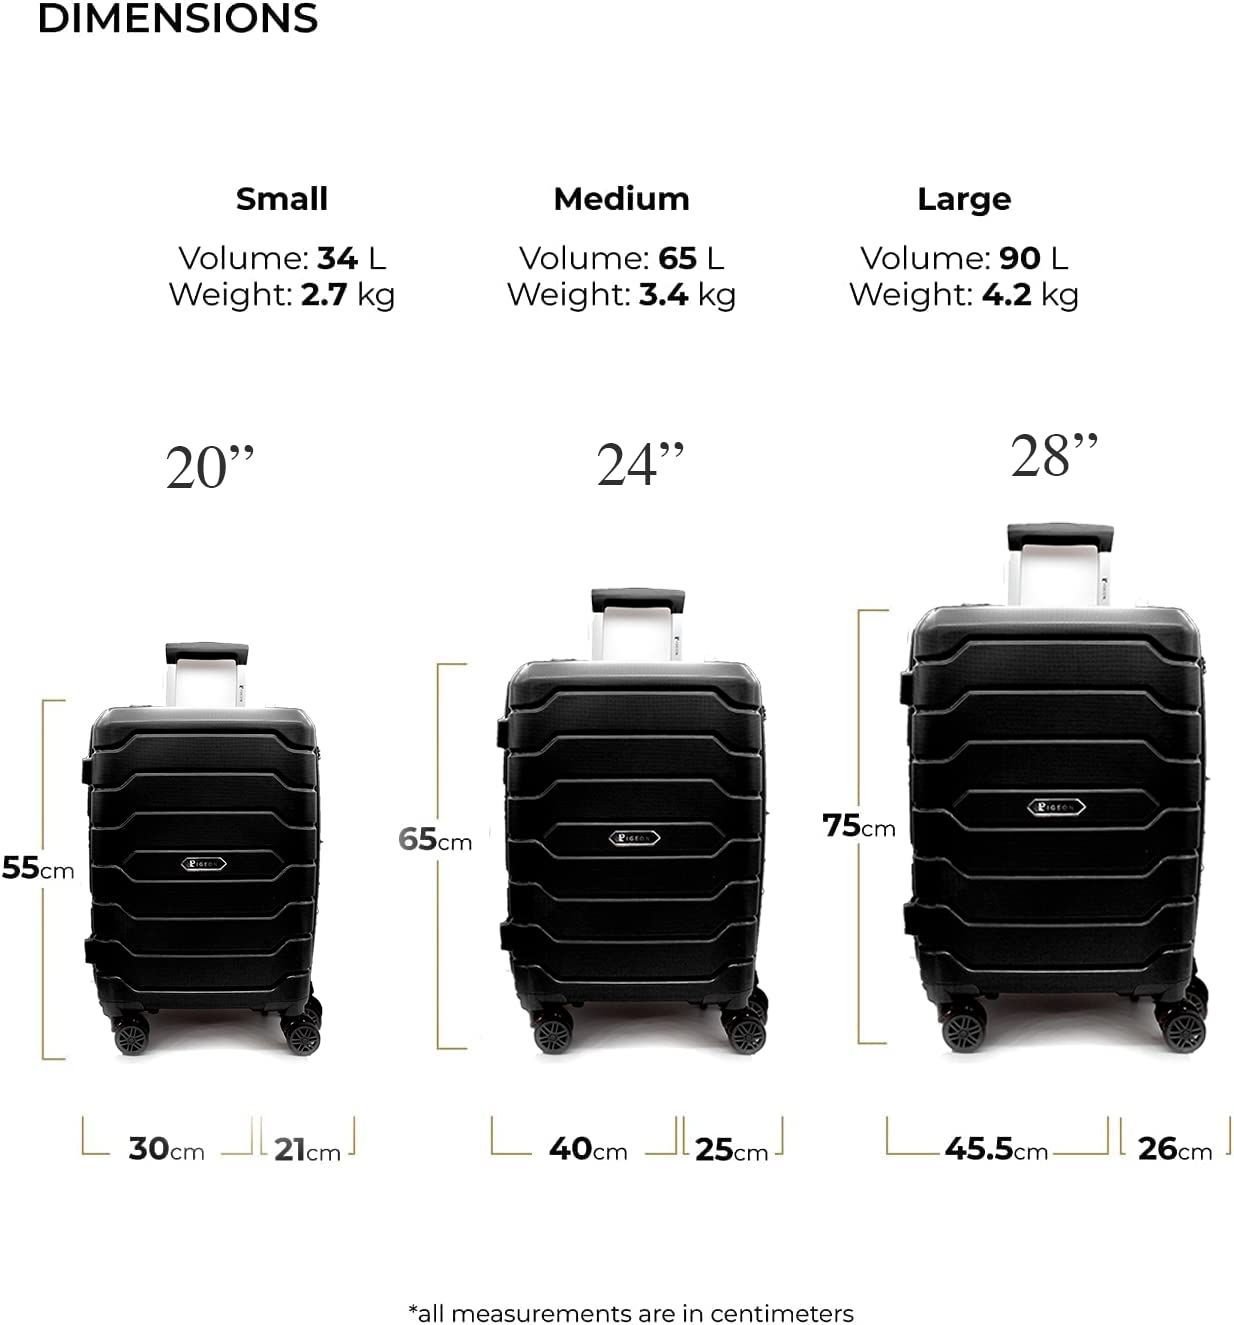 PIGEON New Luggage Set of 3 With Double Secure Zipper - Lightweight PP Luggage Sets, water resistant with 3 digit number Lock